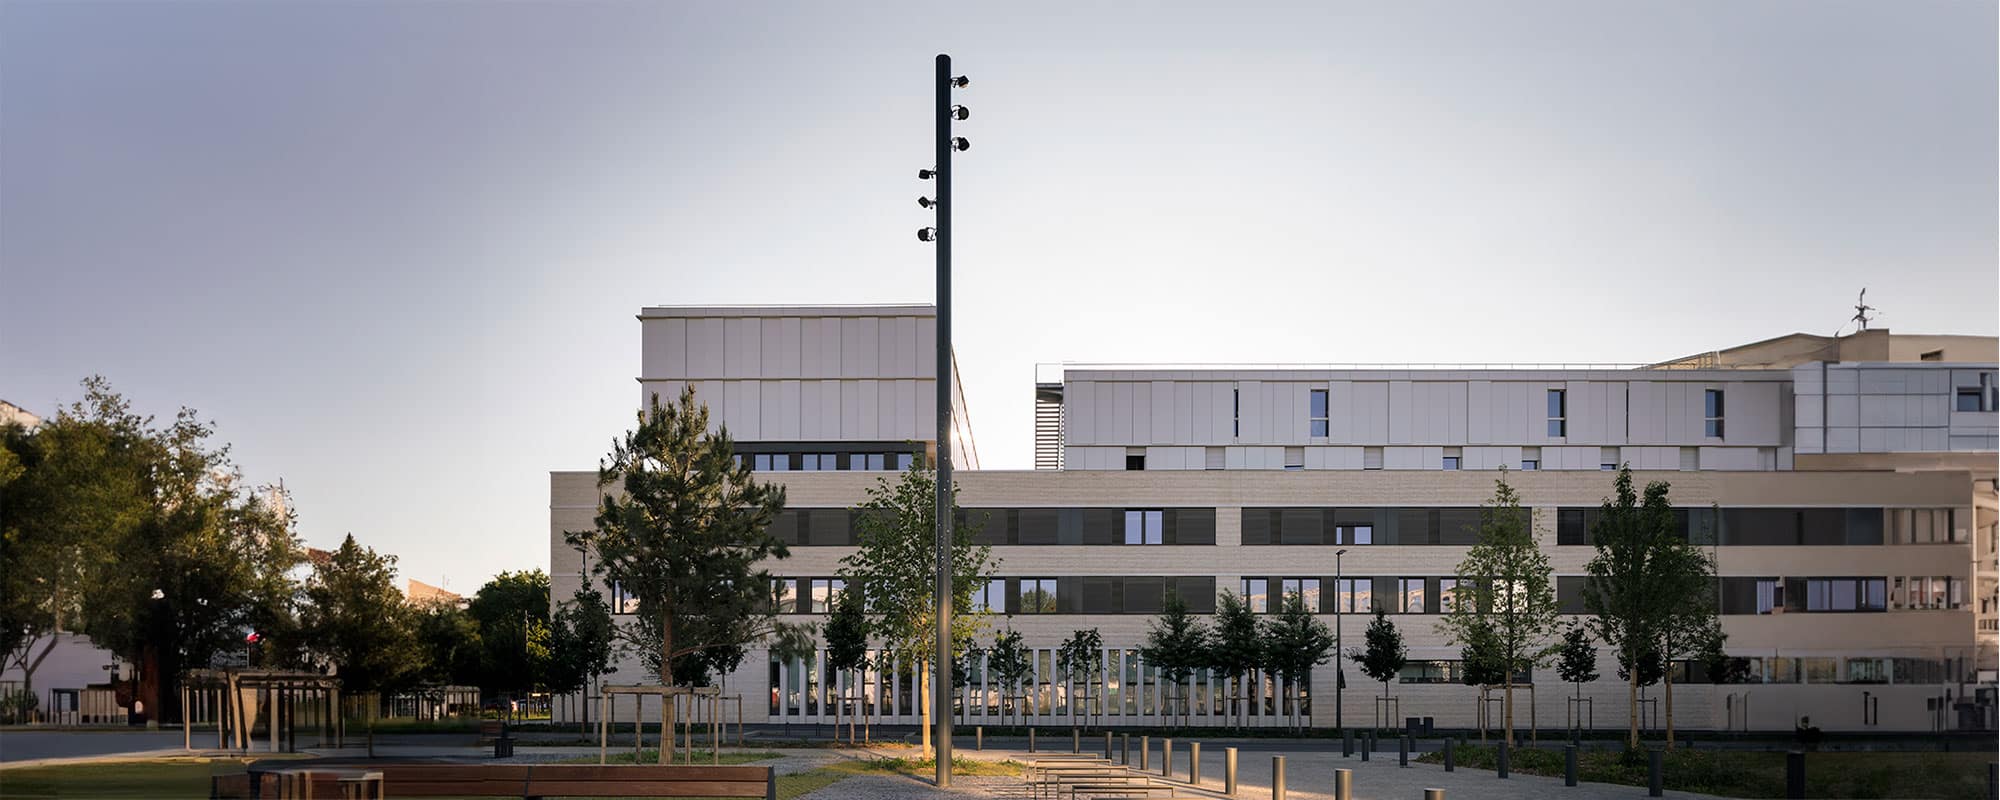 The Green, Saclay, France dotted with custom-made openwork Structure K equipped with our Paulette floodlights